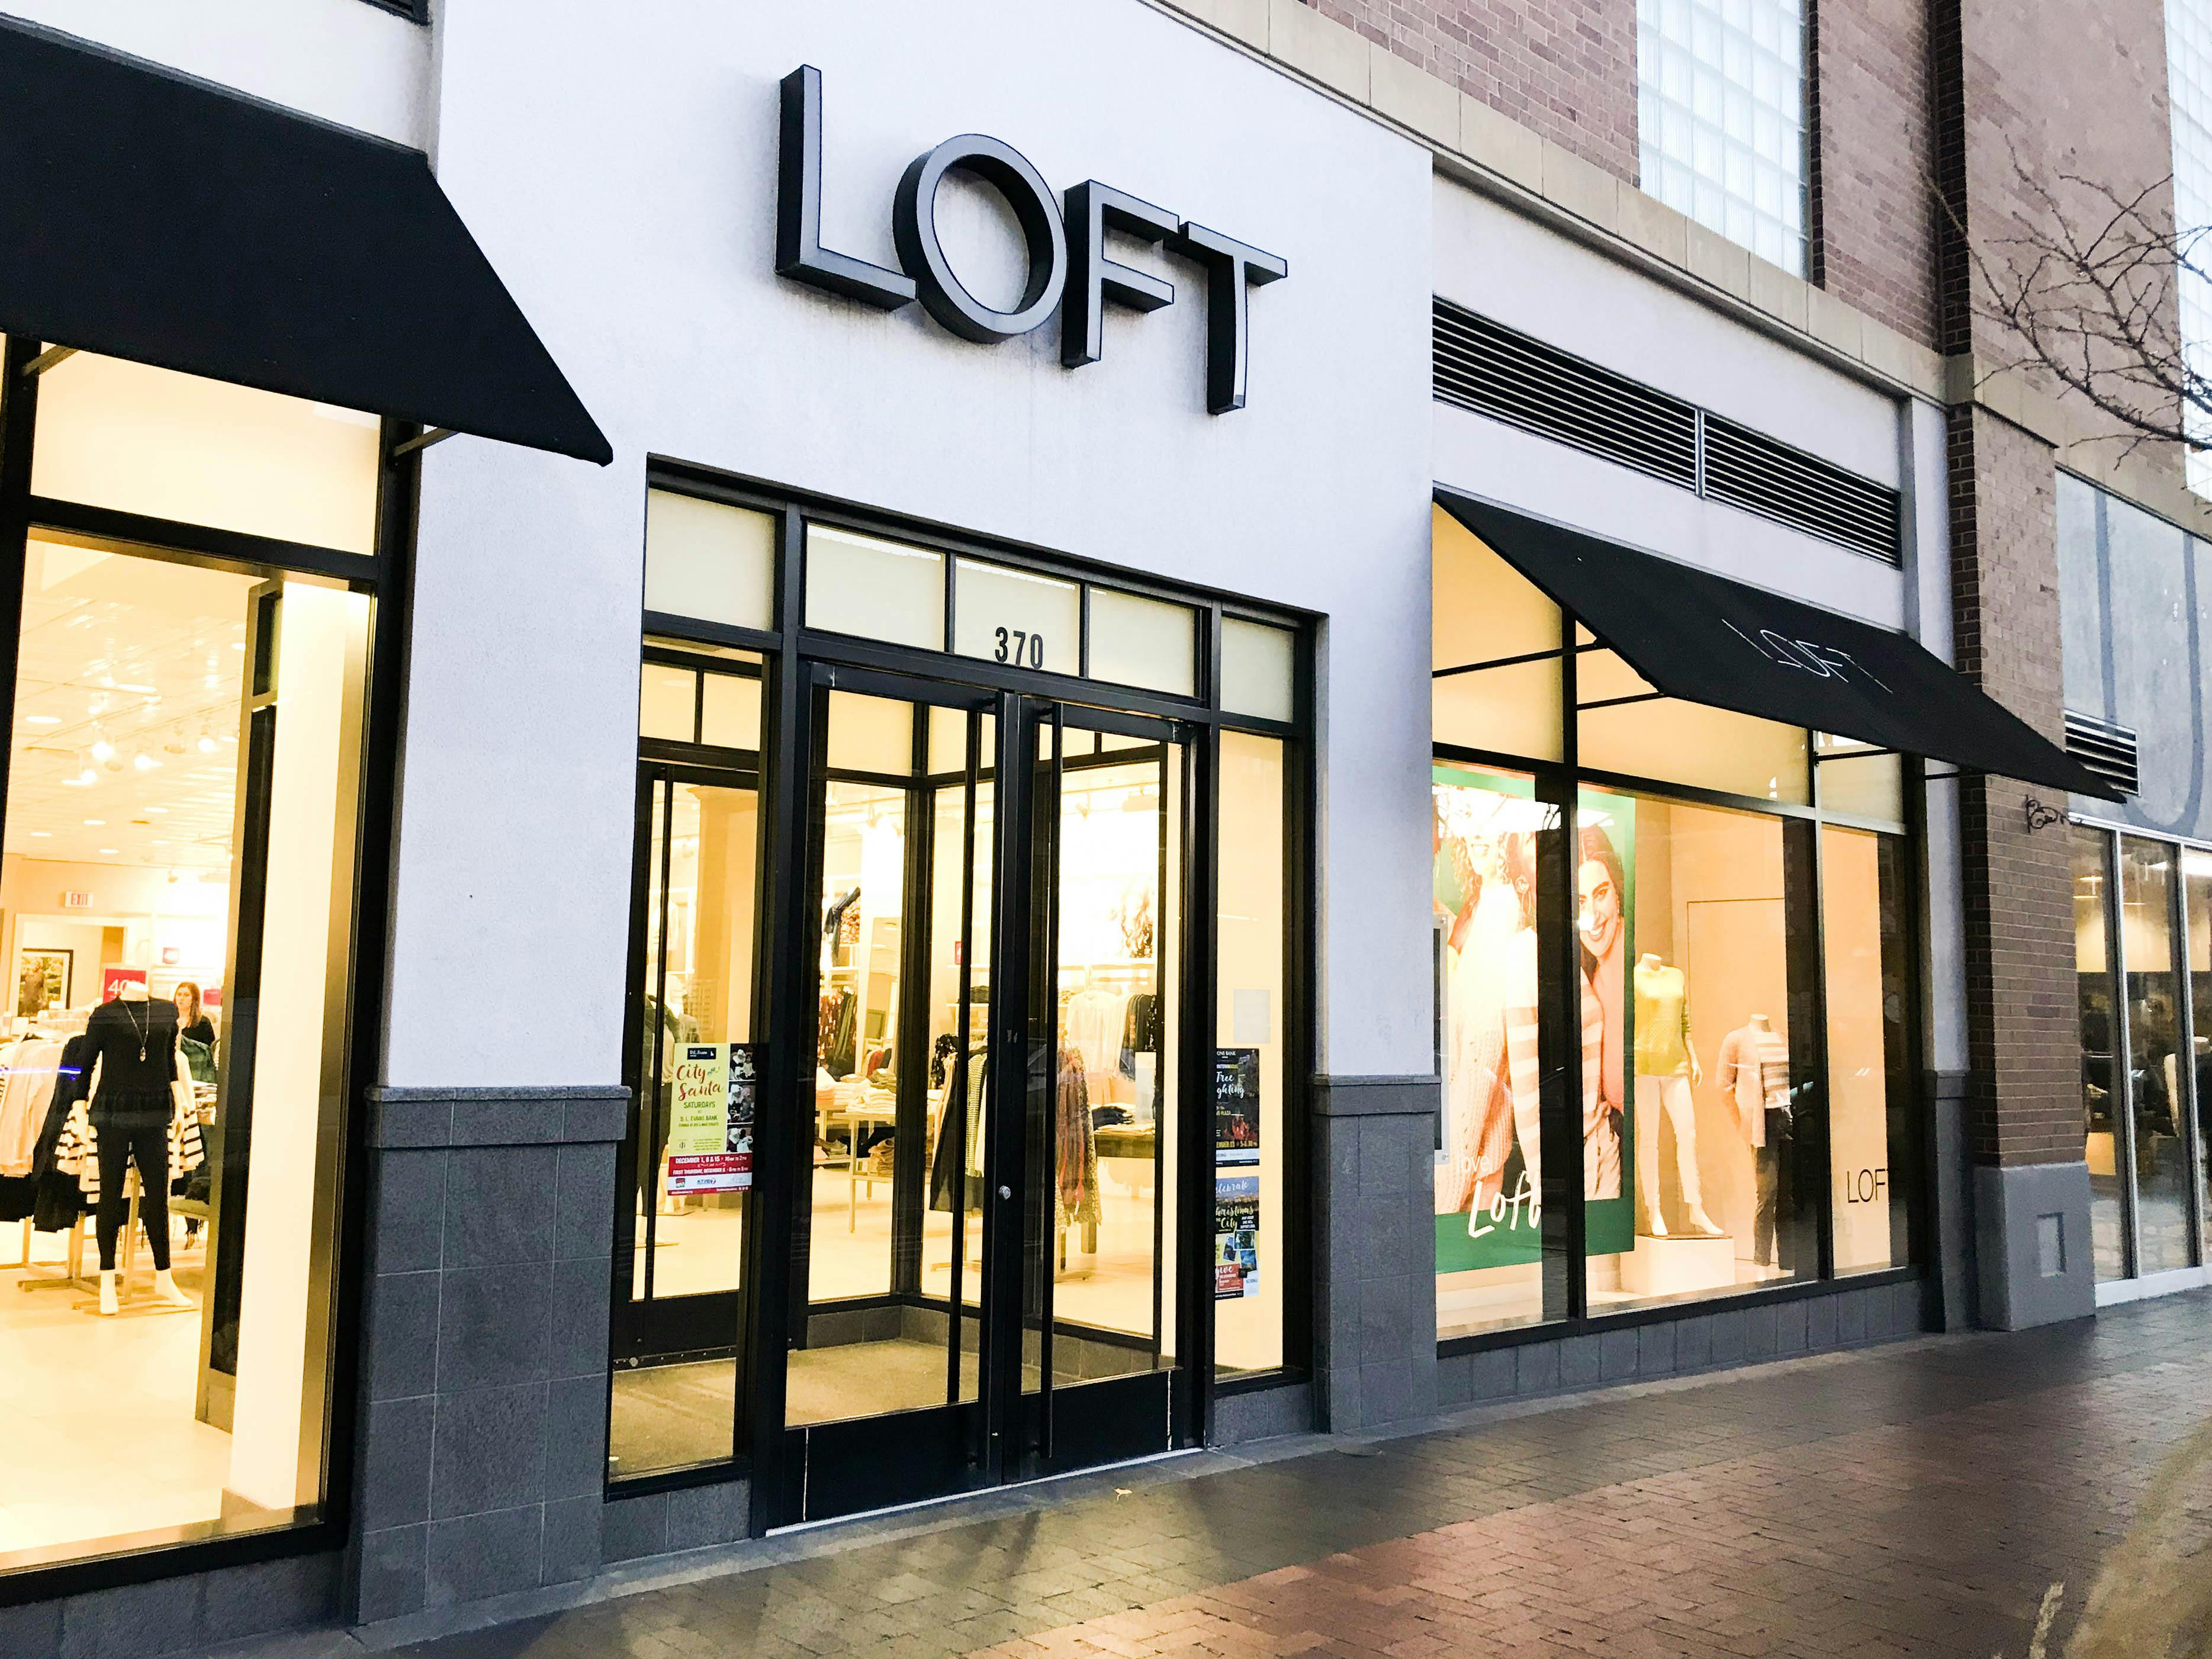 20 Simple Steps To Shop At Loft Like A Pro The Krazy Coupon Lady [ 2802 x 3736 Pixel ]